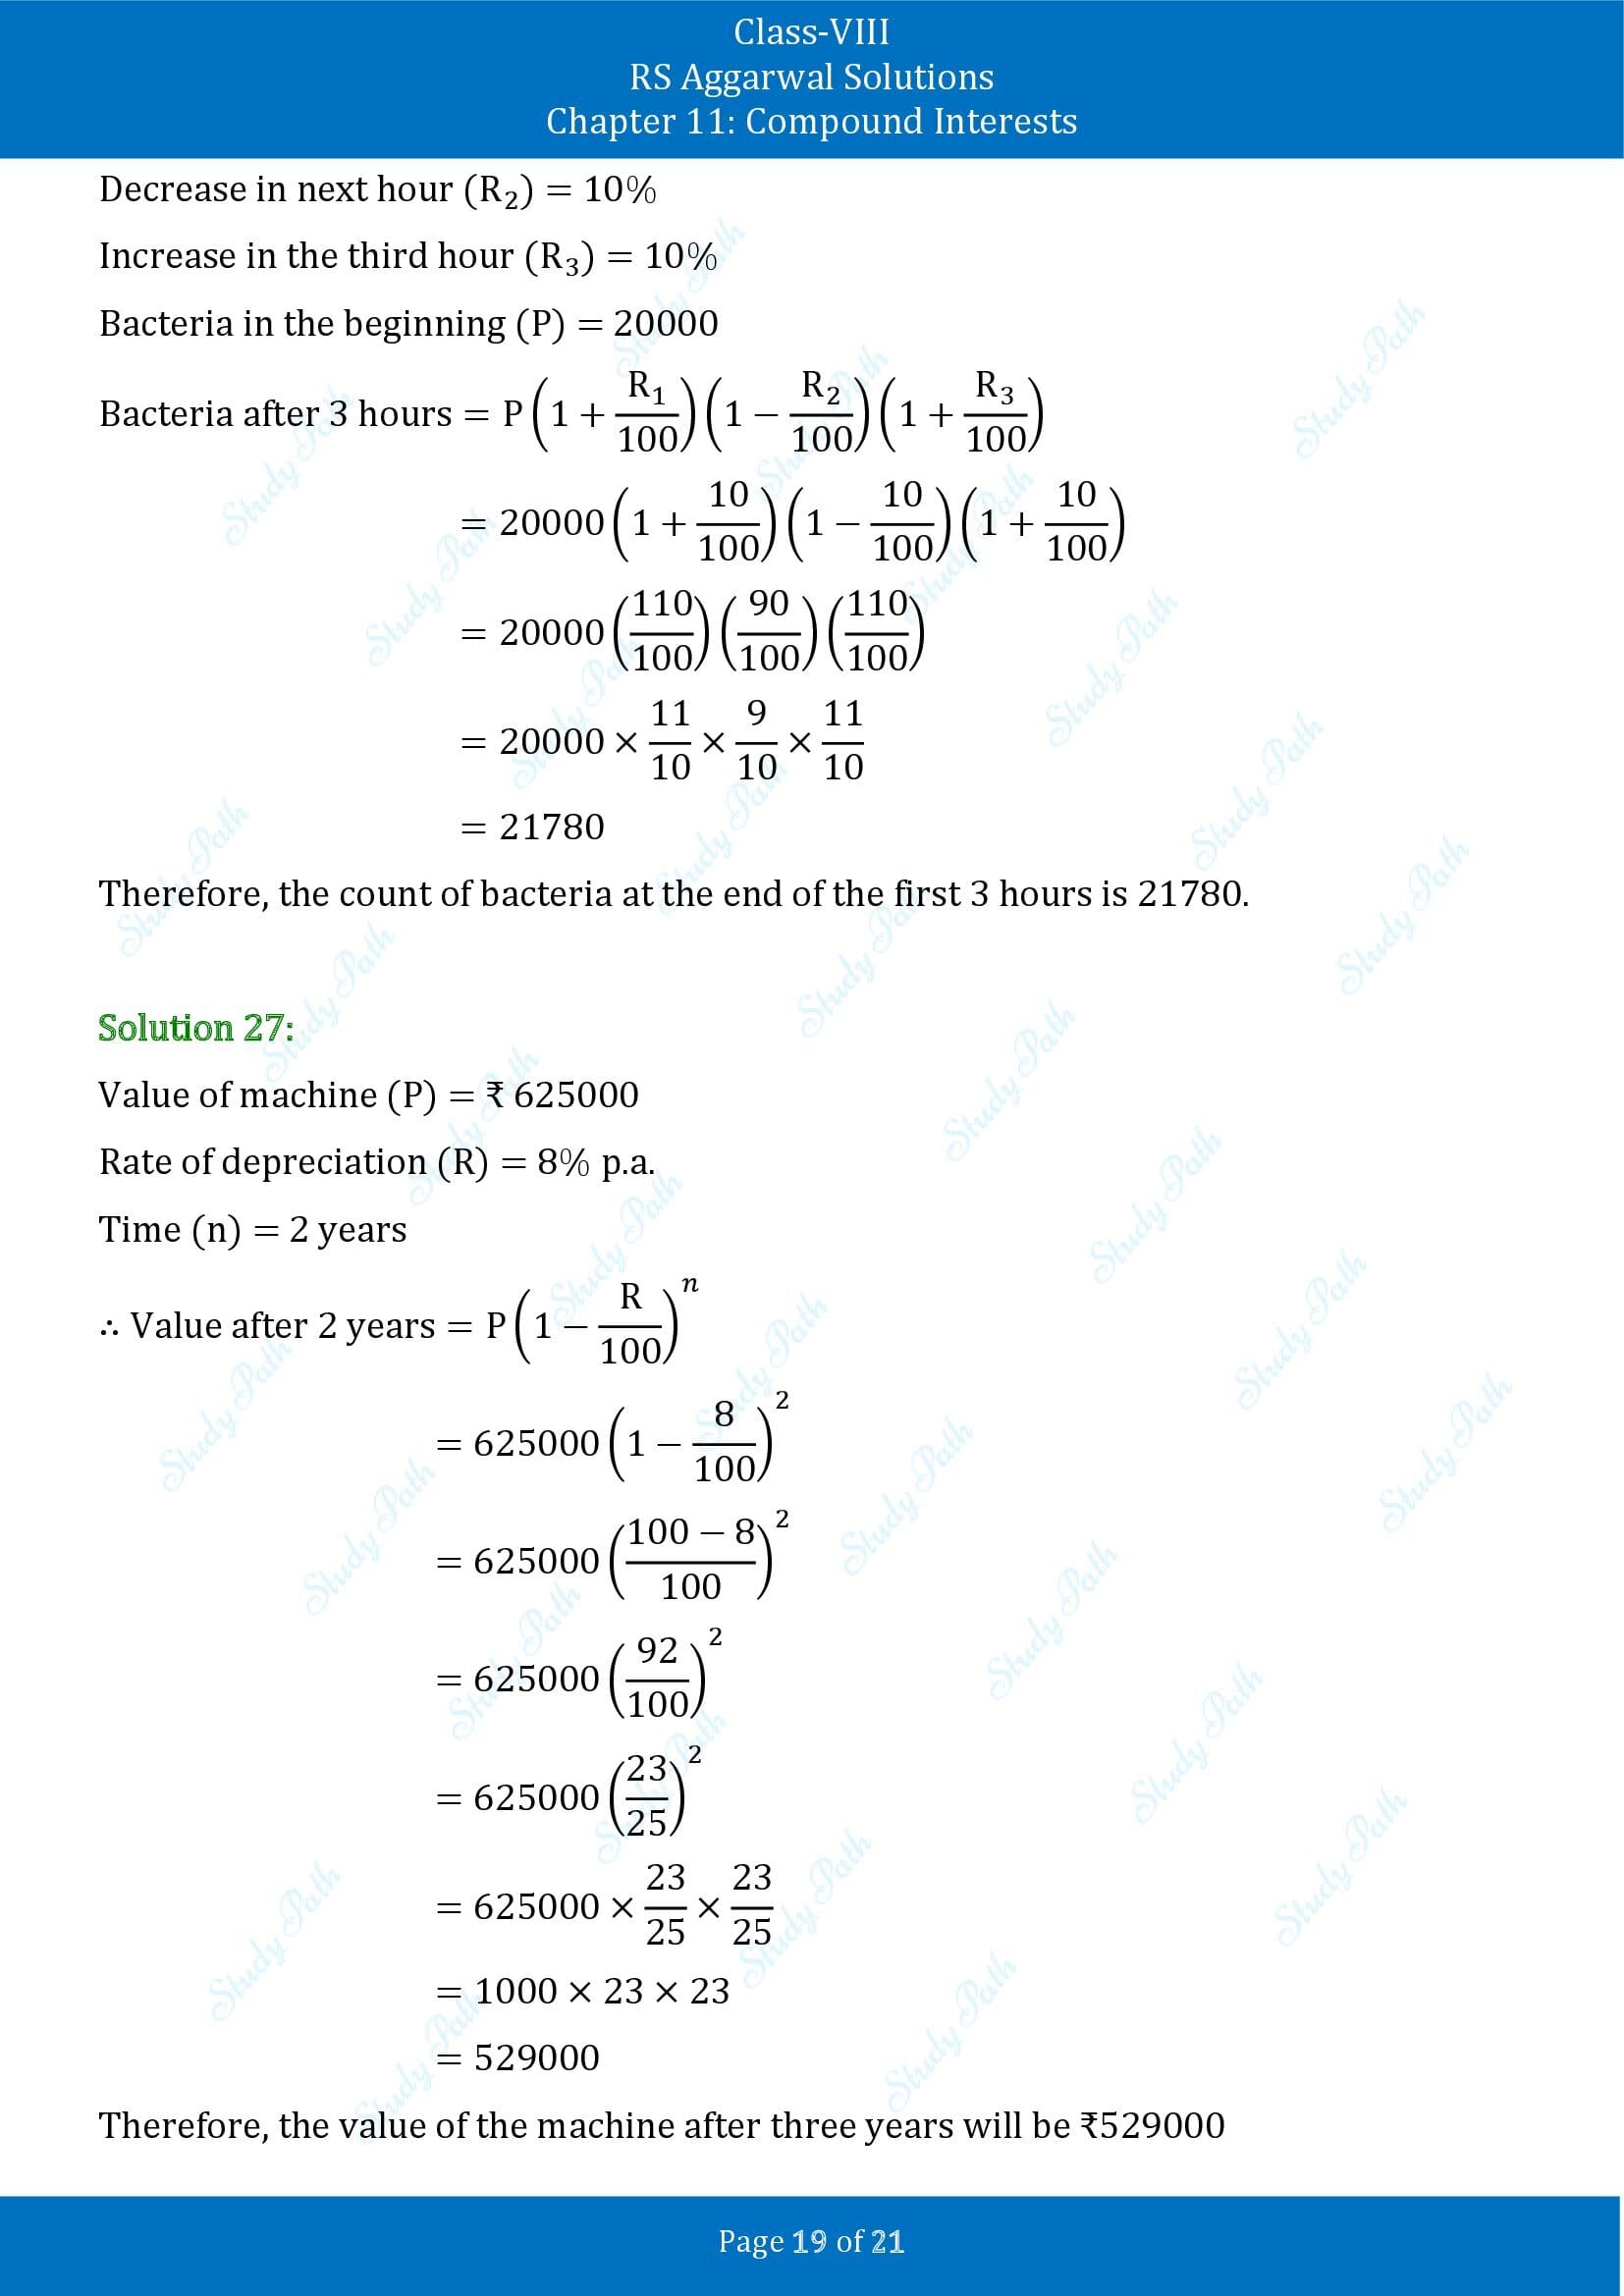 RS Aggarwal Solutions Class 8 Chapter 11 Compound Interests Exercise 11B 00019